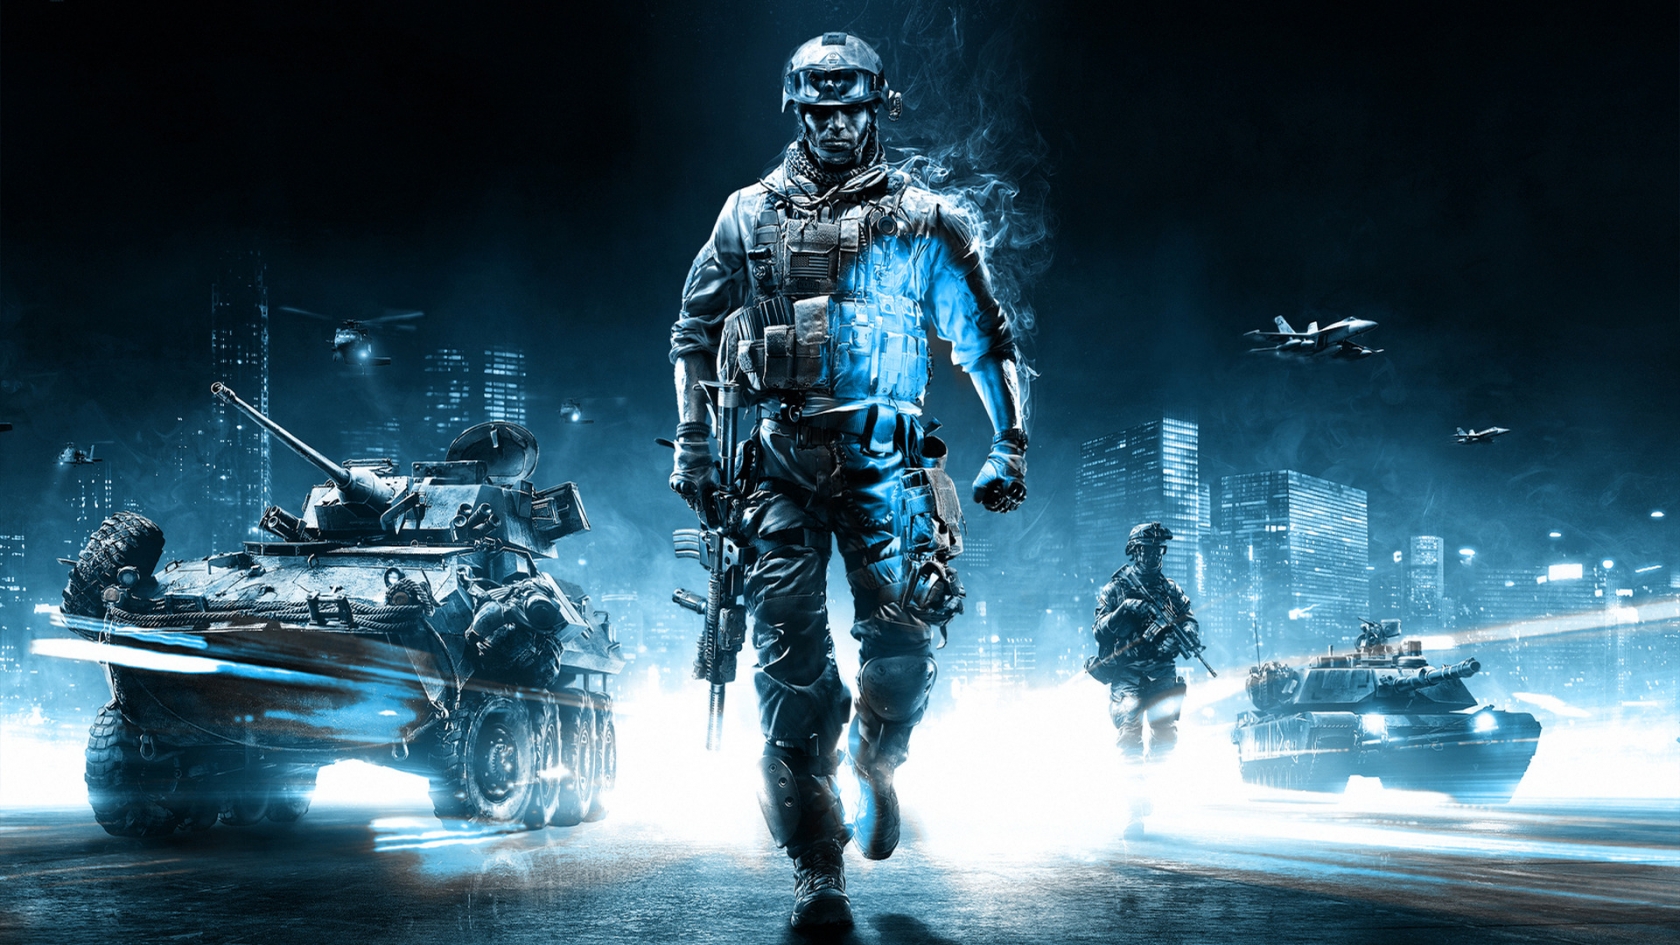 Battlefield 3 Action Game for 1680 x 945 HDTV resolution